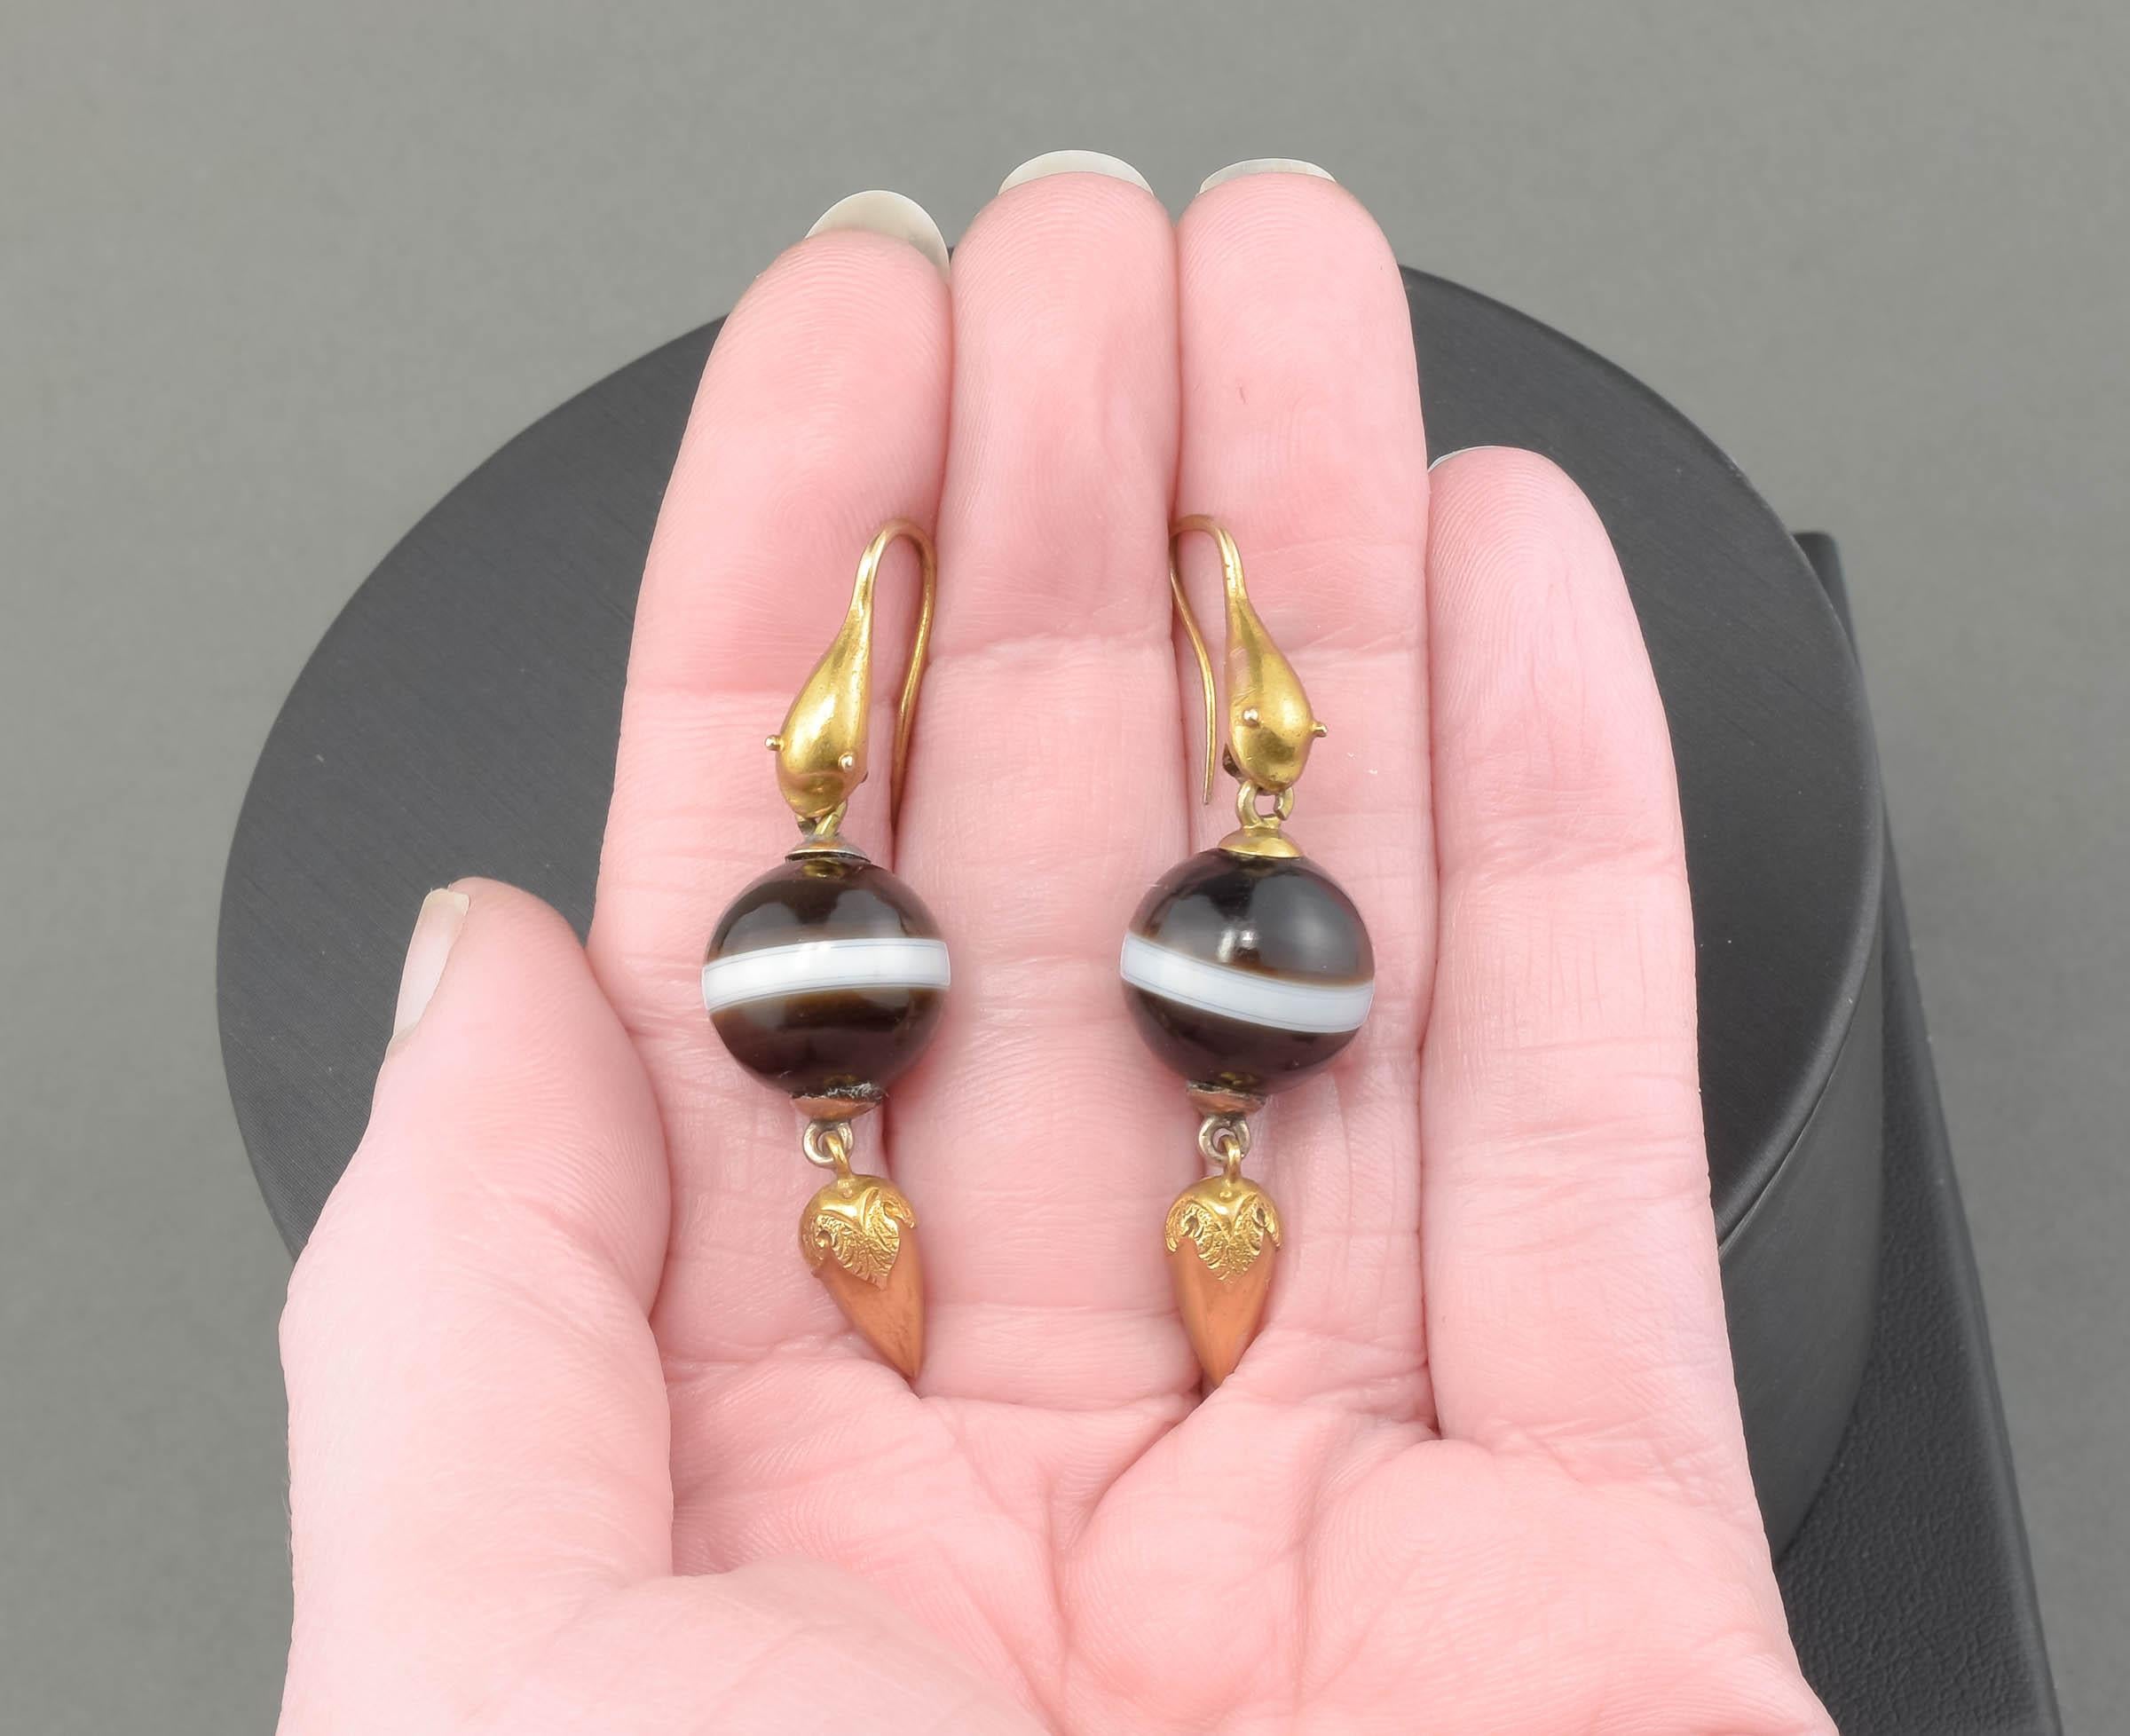 Women's Victorian Gold Snake Earrings with Banded Agate Drops